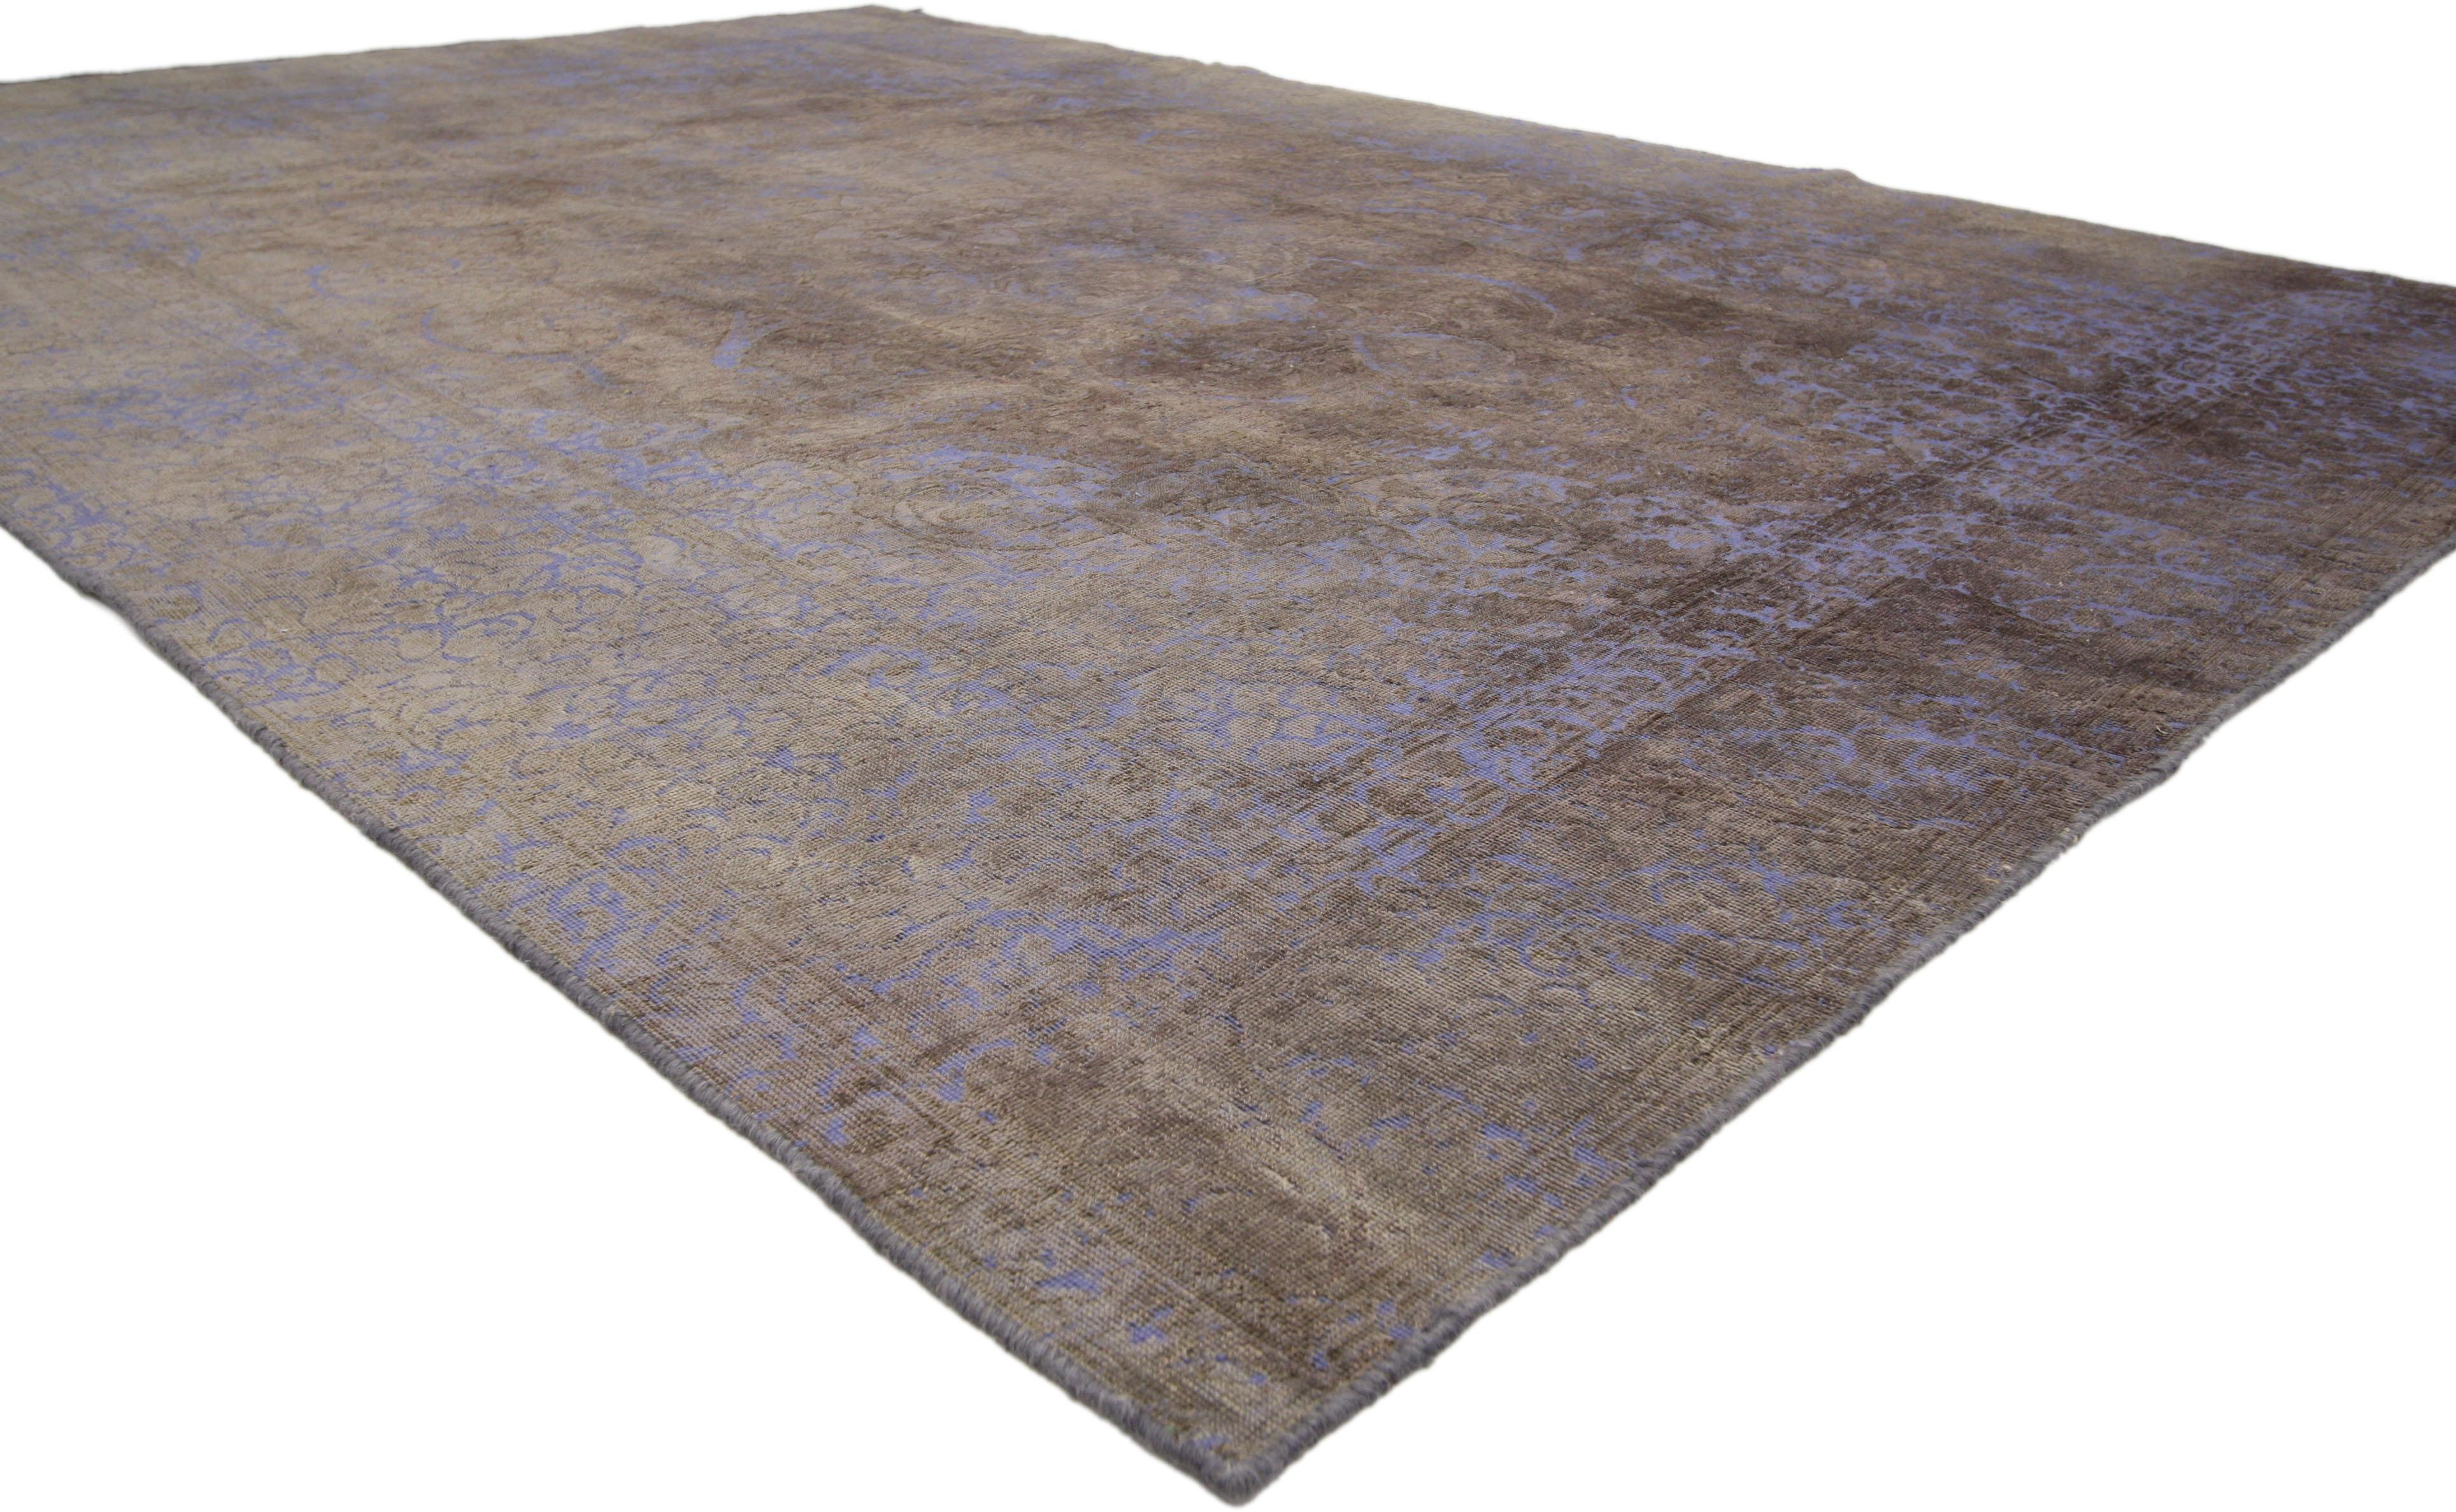 ​60775 Distressed Vintage Turkish Rug with Romantic French Modern Industrial Style 07'08 x 11'02. Balancing a timeless design with a romantic rustic sensibility, this hand knotted wool distressed vintage Turkish overdyed rug beautifully embodies a